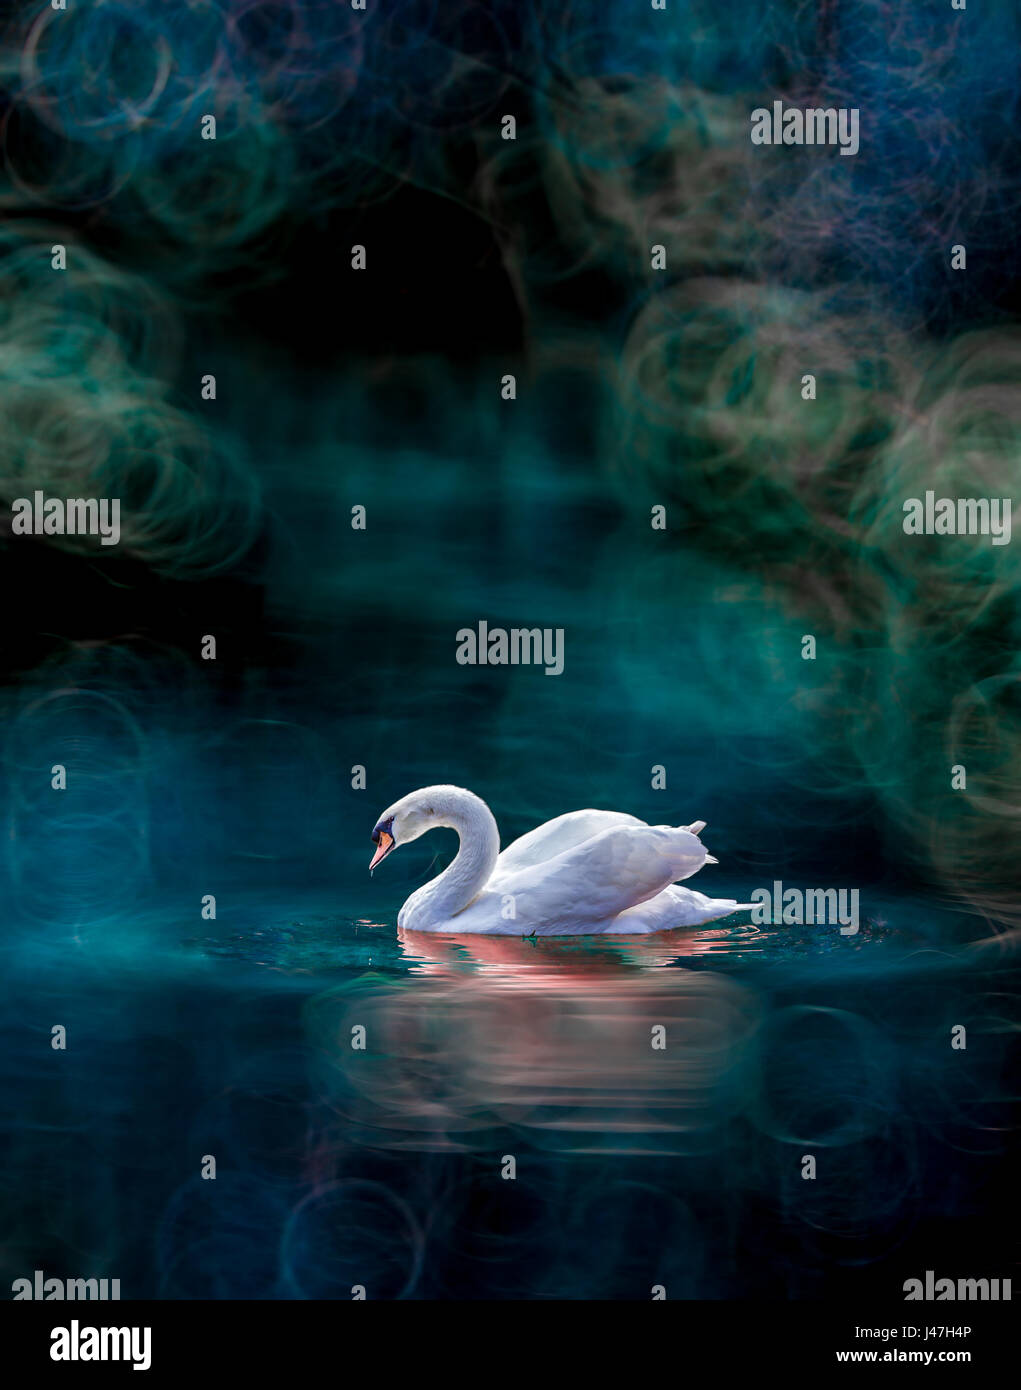 Fairy swan with abstract background Stock Photo